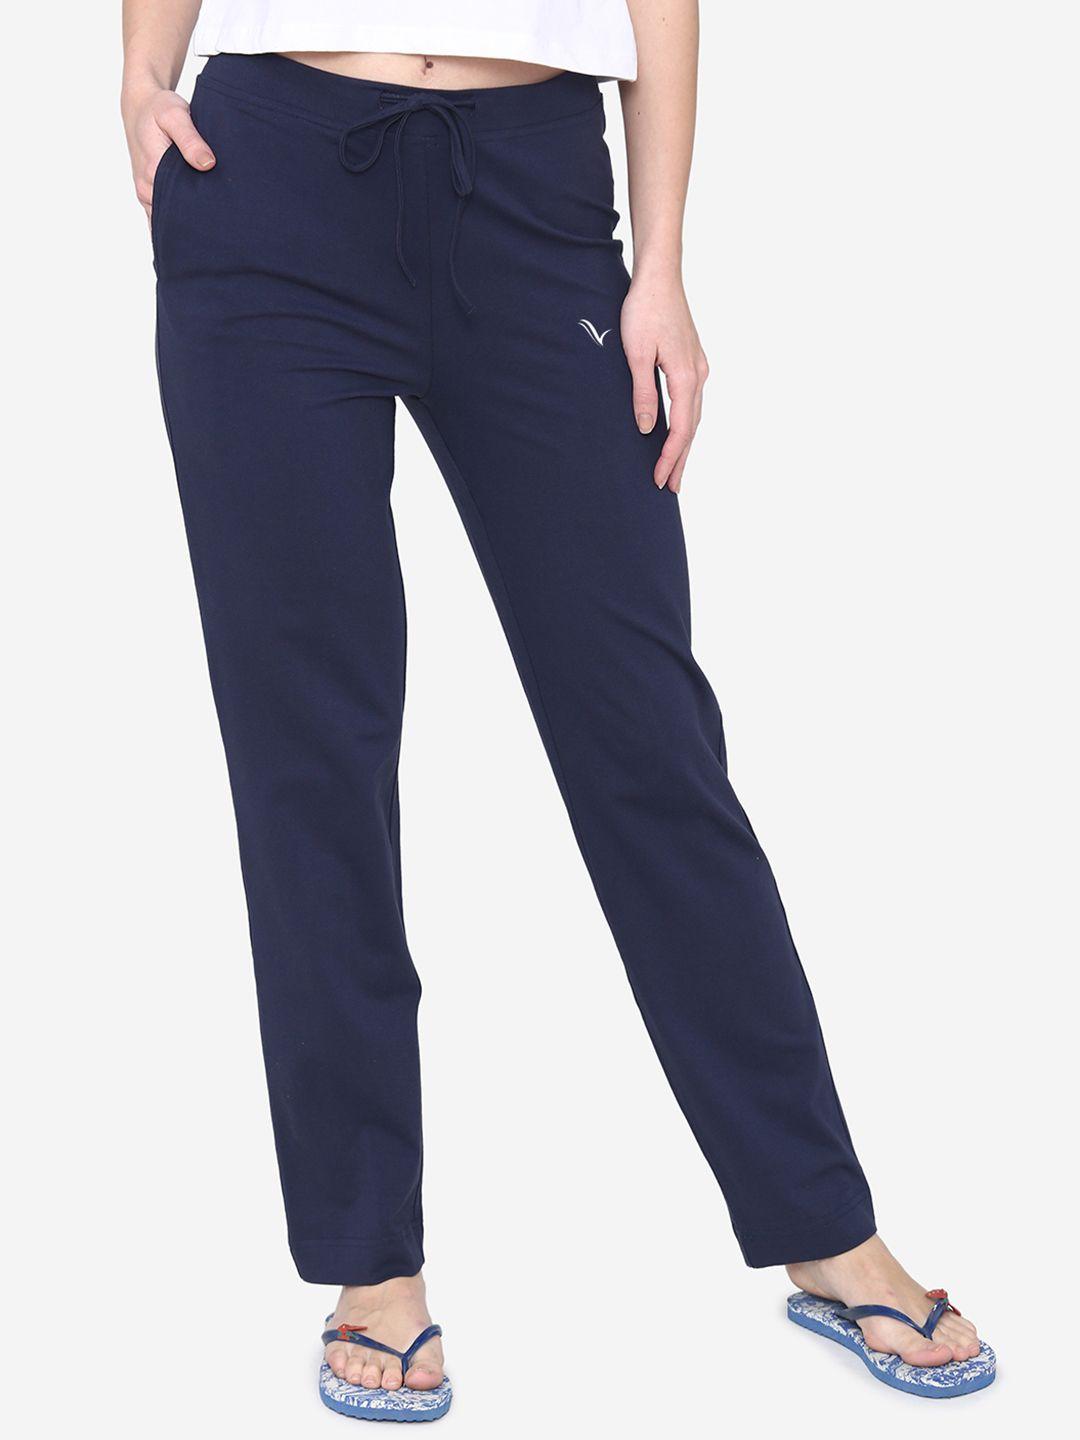 vami women navy blue solid relax lounge pants